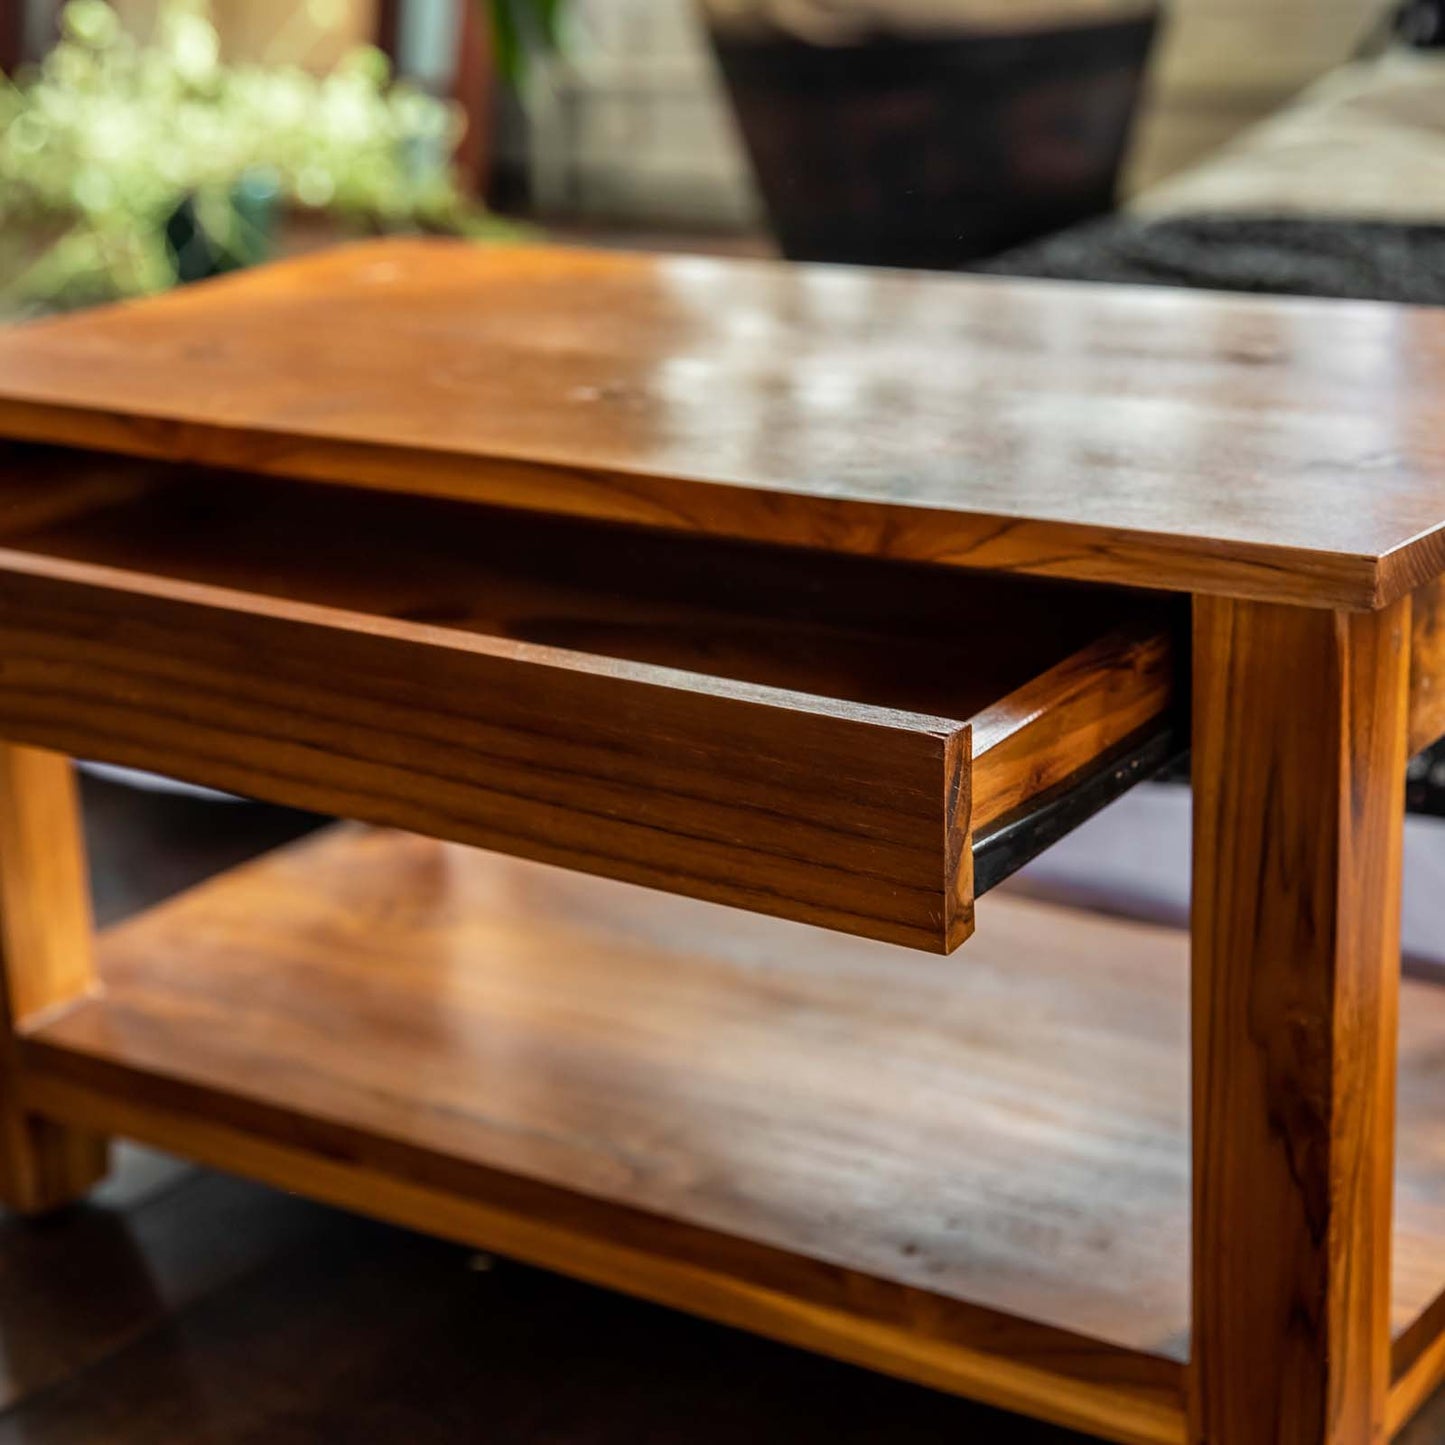 Teak Altar Table with Drawer